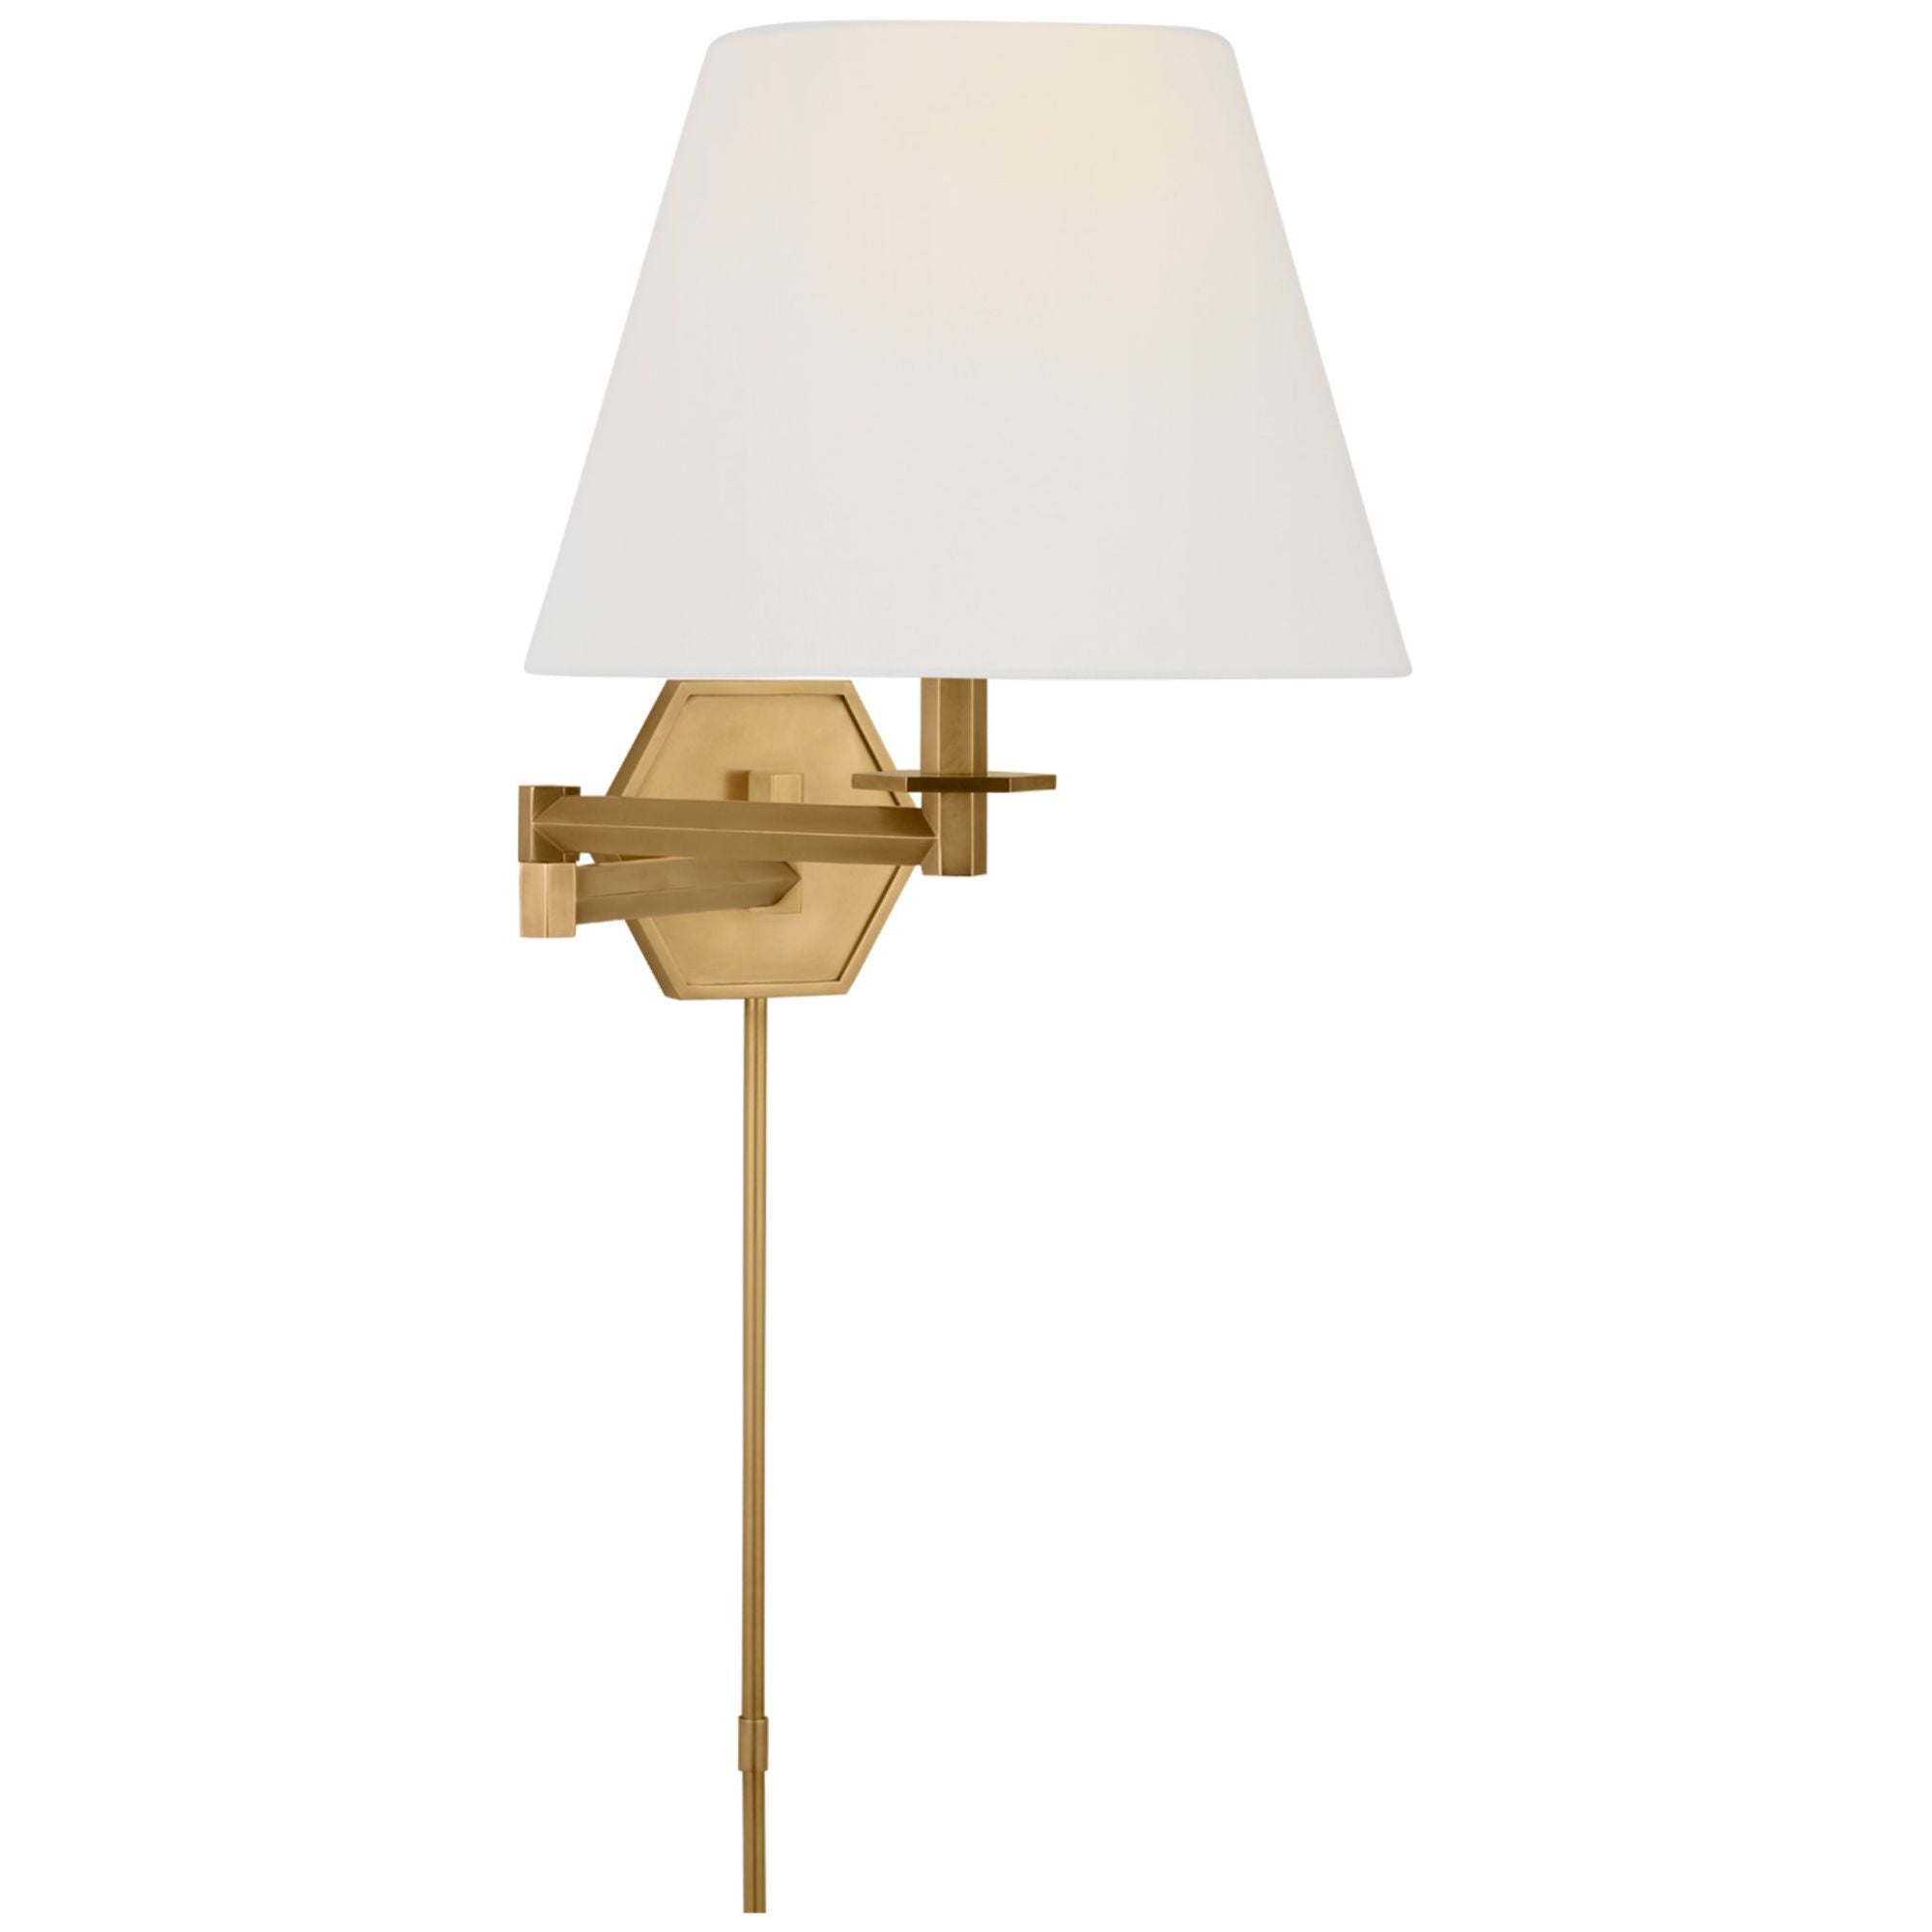 Paloma Contreras Olivier Swing Arm Wall Light in Hand-Rubbed Antique Brass with Linen Shade